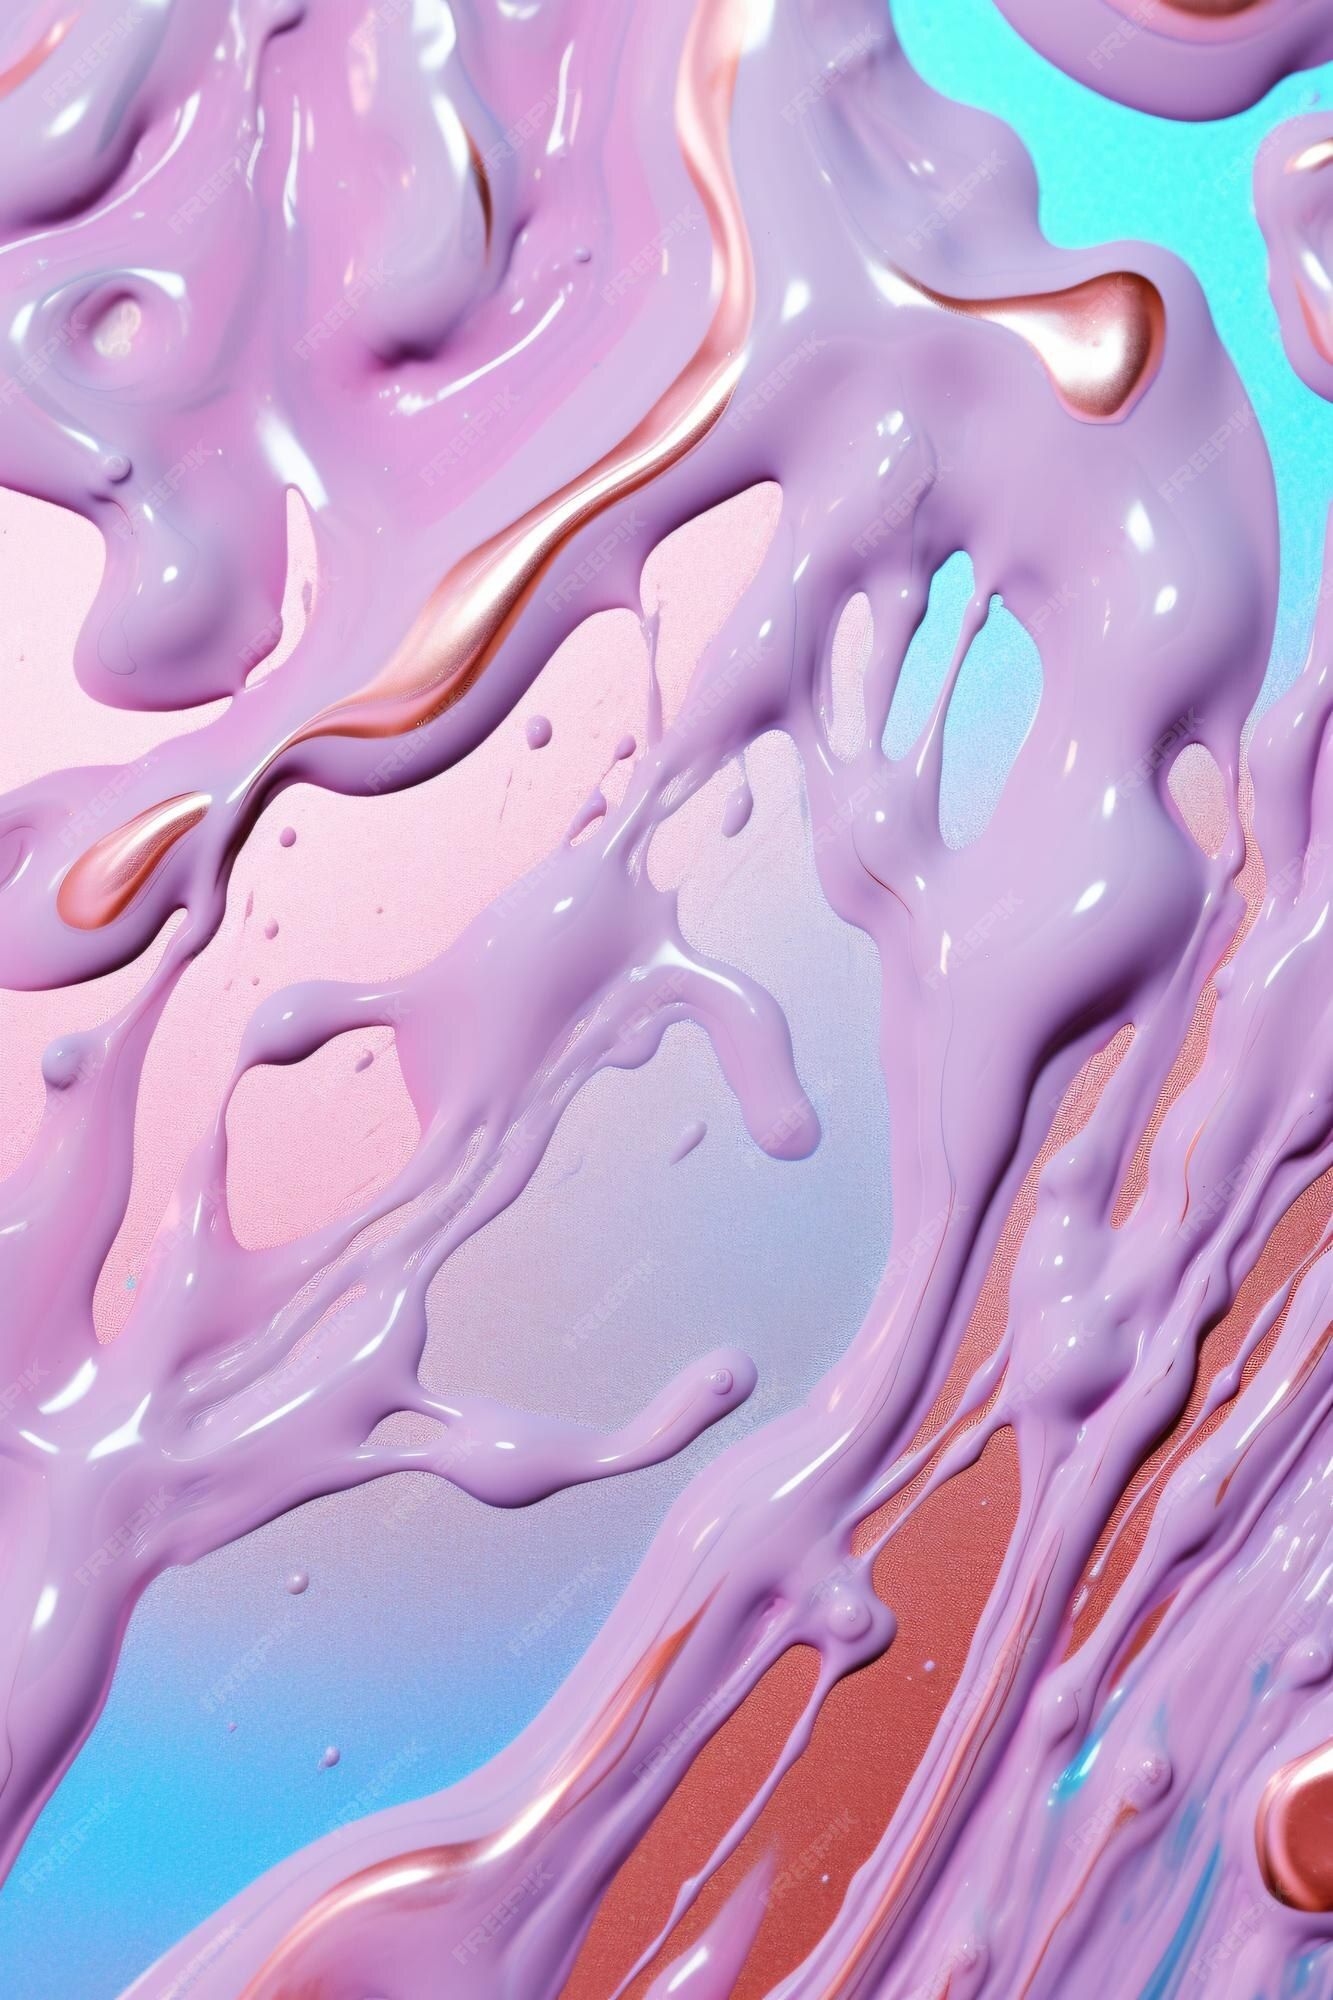 An abstract image of purple, pink and blue liquid - Slime